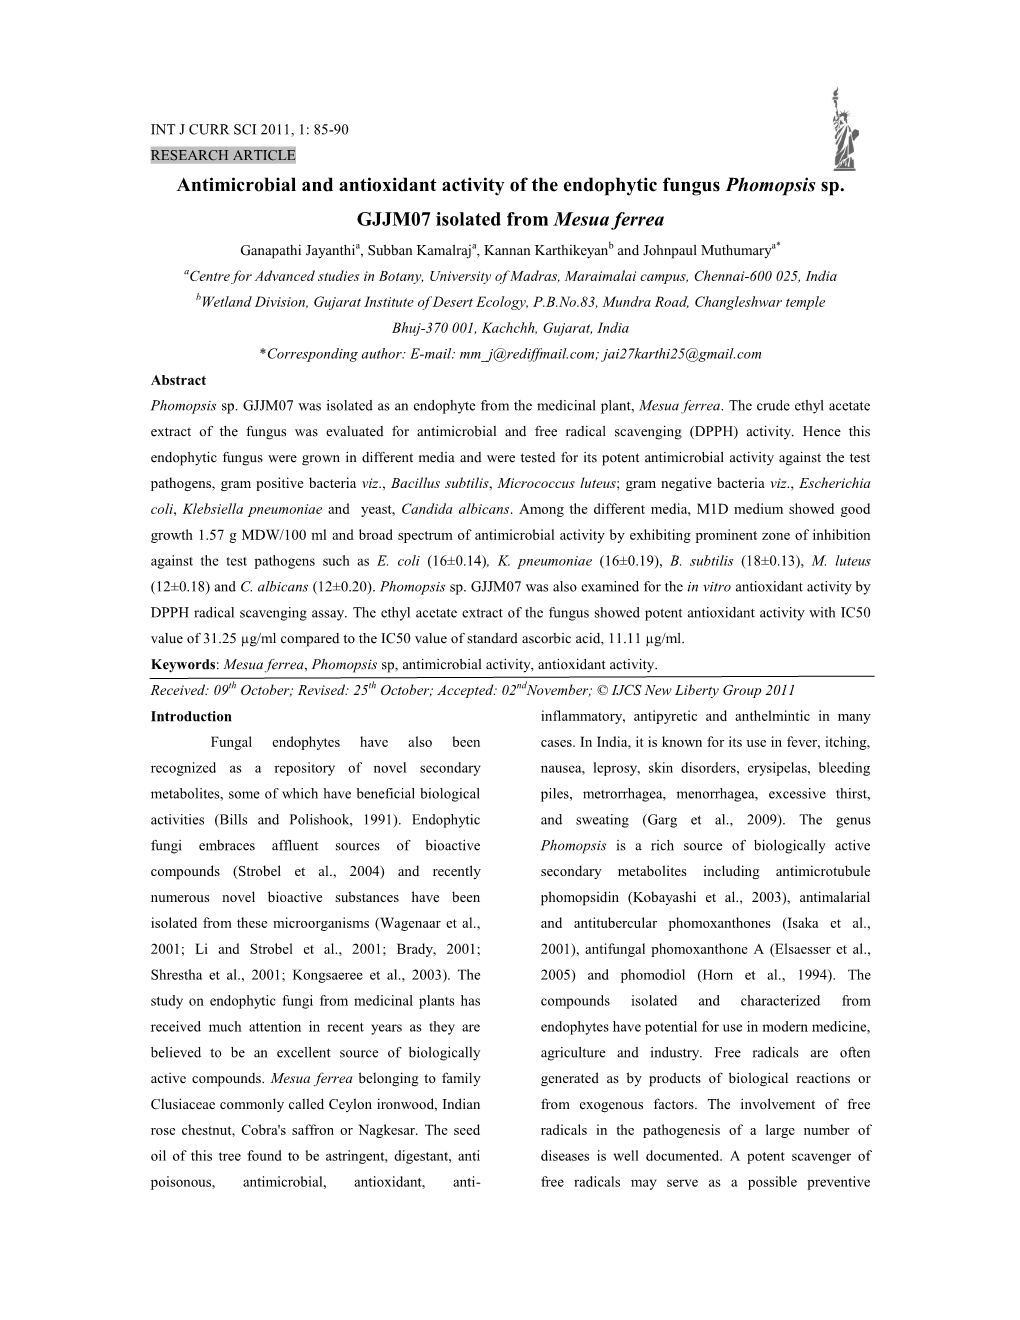 Antimicrobial and Antioxidant Activity of the Endophytic Fungus Phomopsis Sp